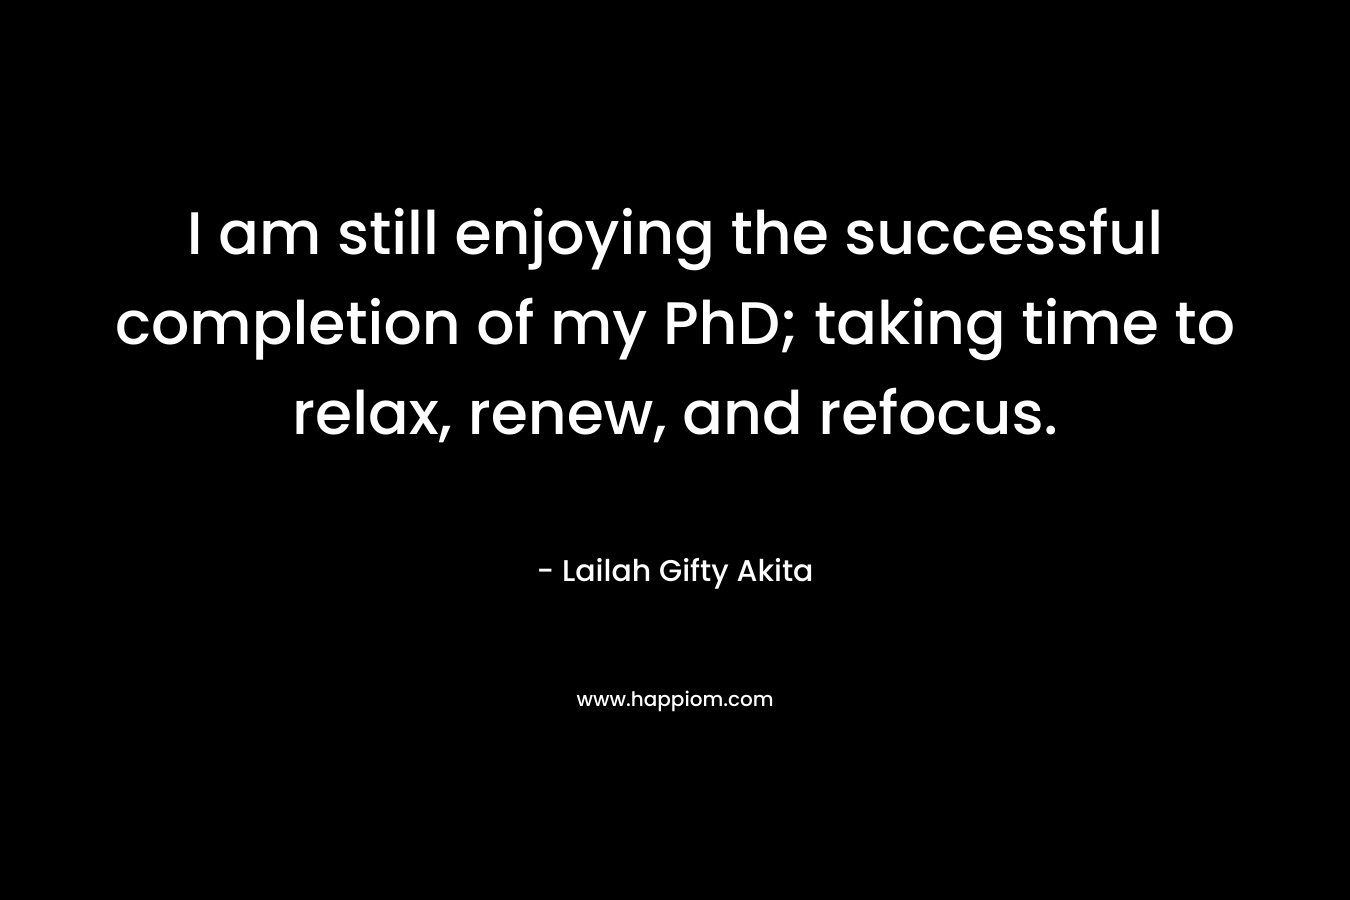 I am still enjoying the successful completion of my PhD; taking time to relax, renew, and refocus. – Lailah Gifty Akita